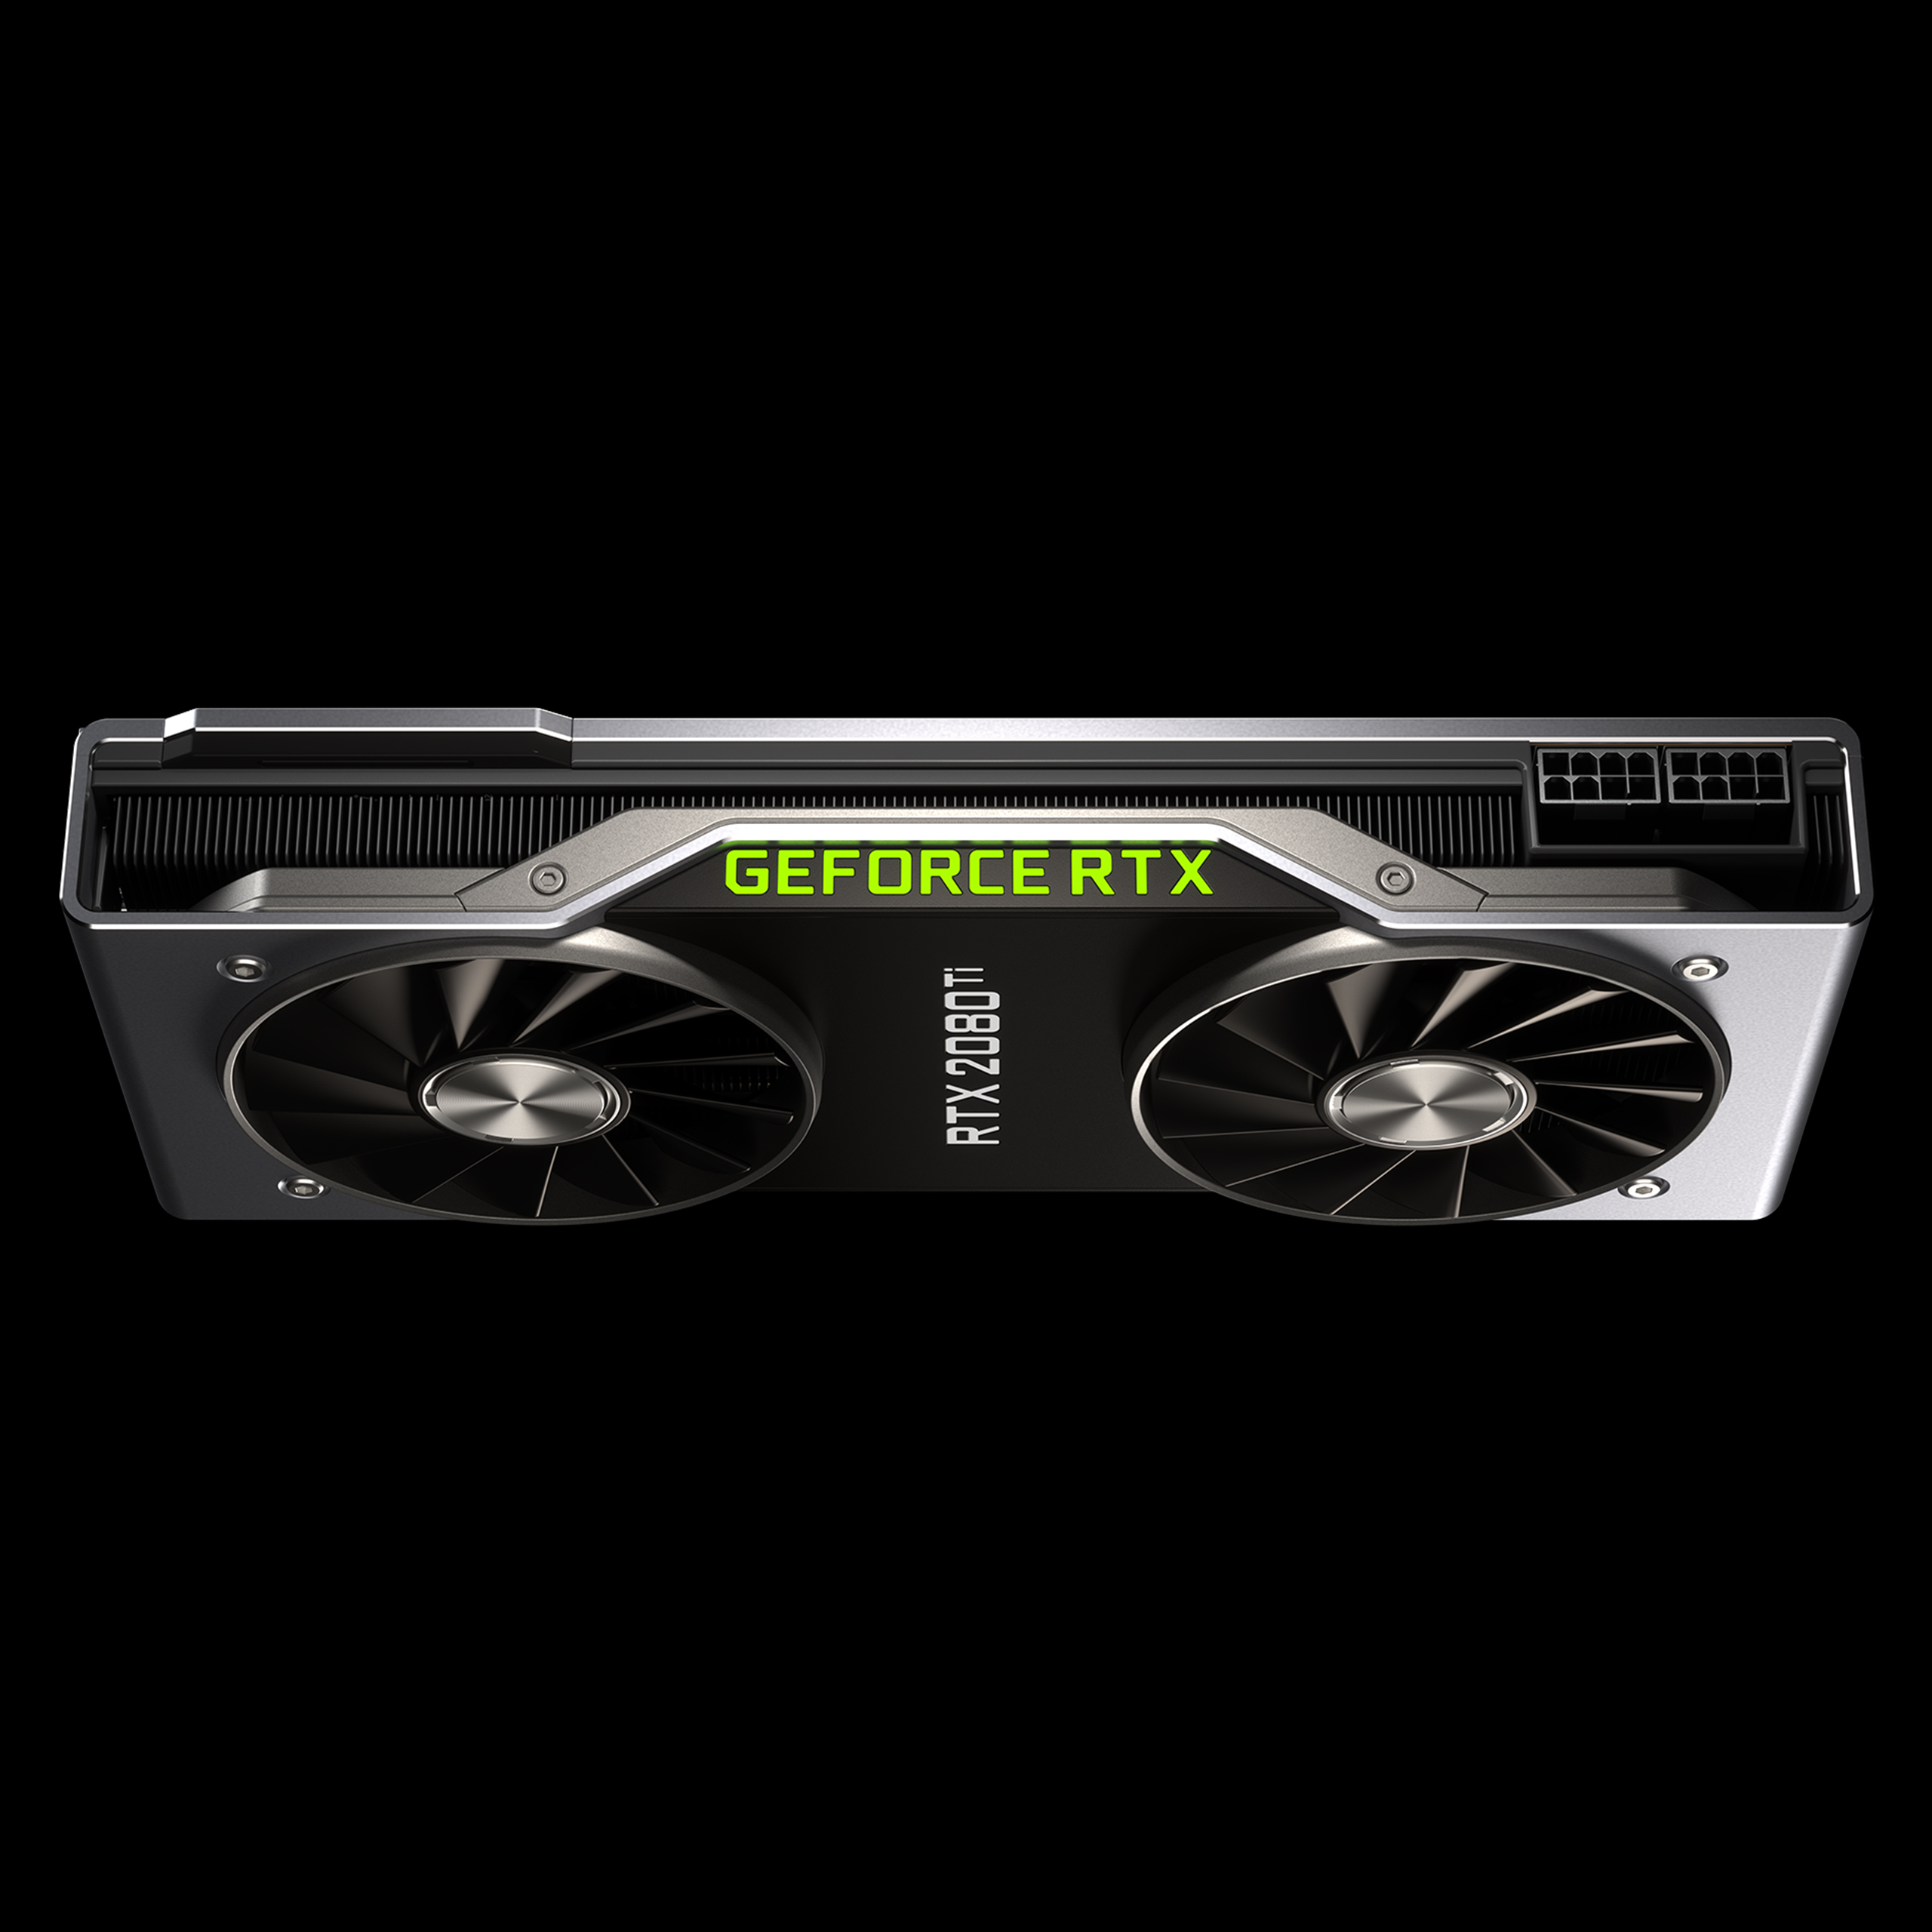 Media asset in full size related to 3dfxzone.it news item entitled as follows: NVIDIA potrebbe diminuire i prezzi delle video card GeForce RTX 20-Series | Image Name: news29419_GeForce-RTX-2080-Ti_1.jpg